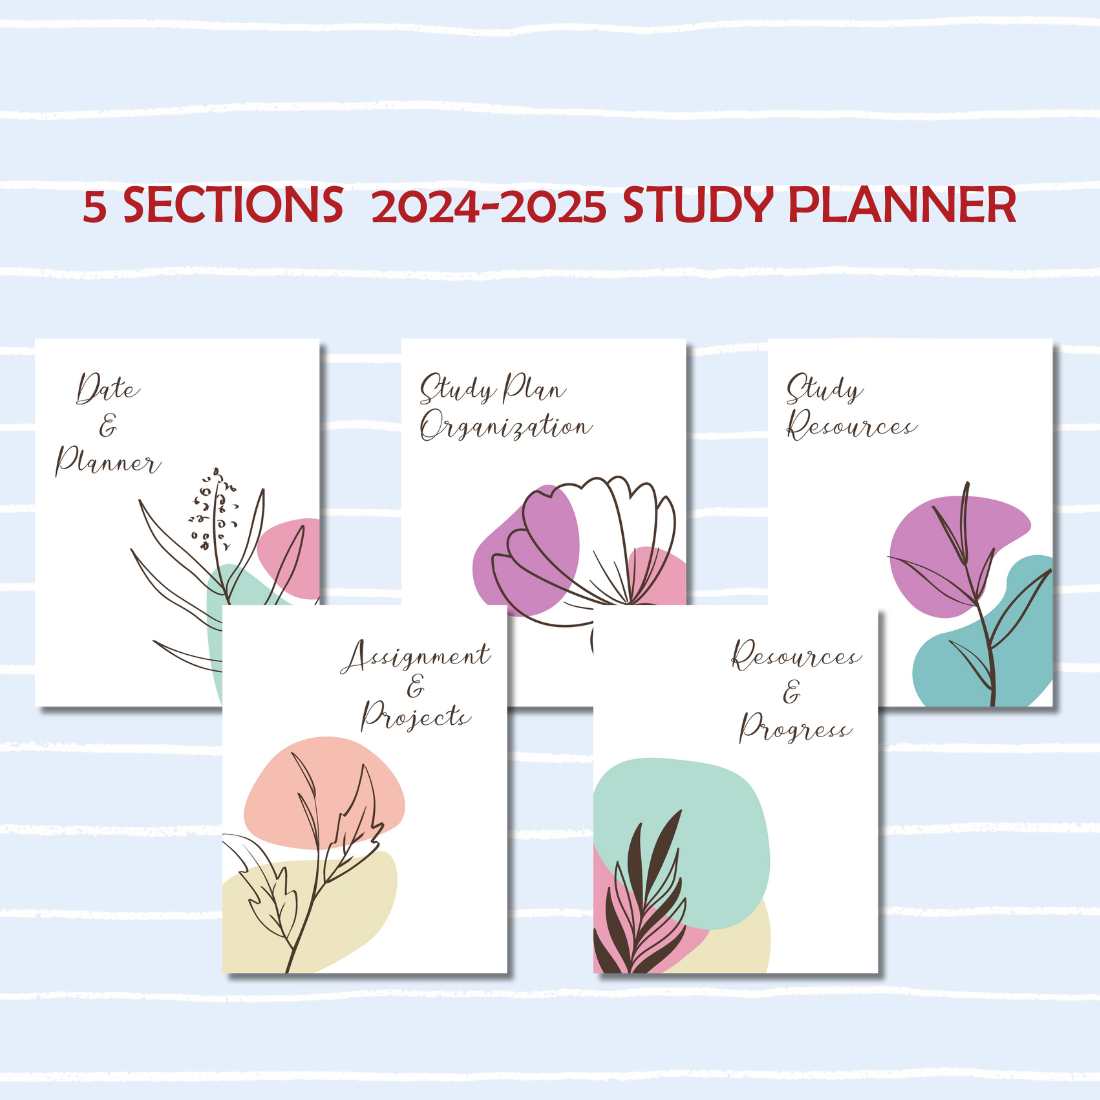 2024-2025 Study Planner - Canva Template preview image.